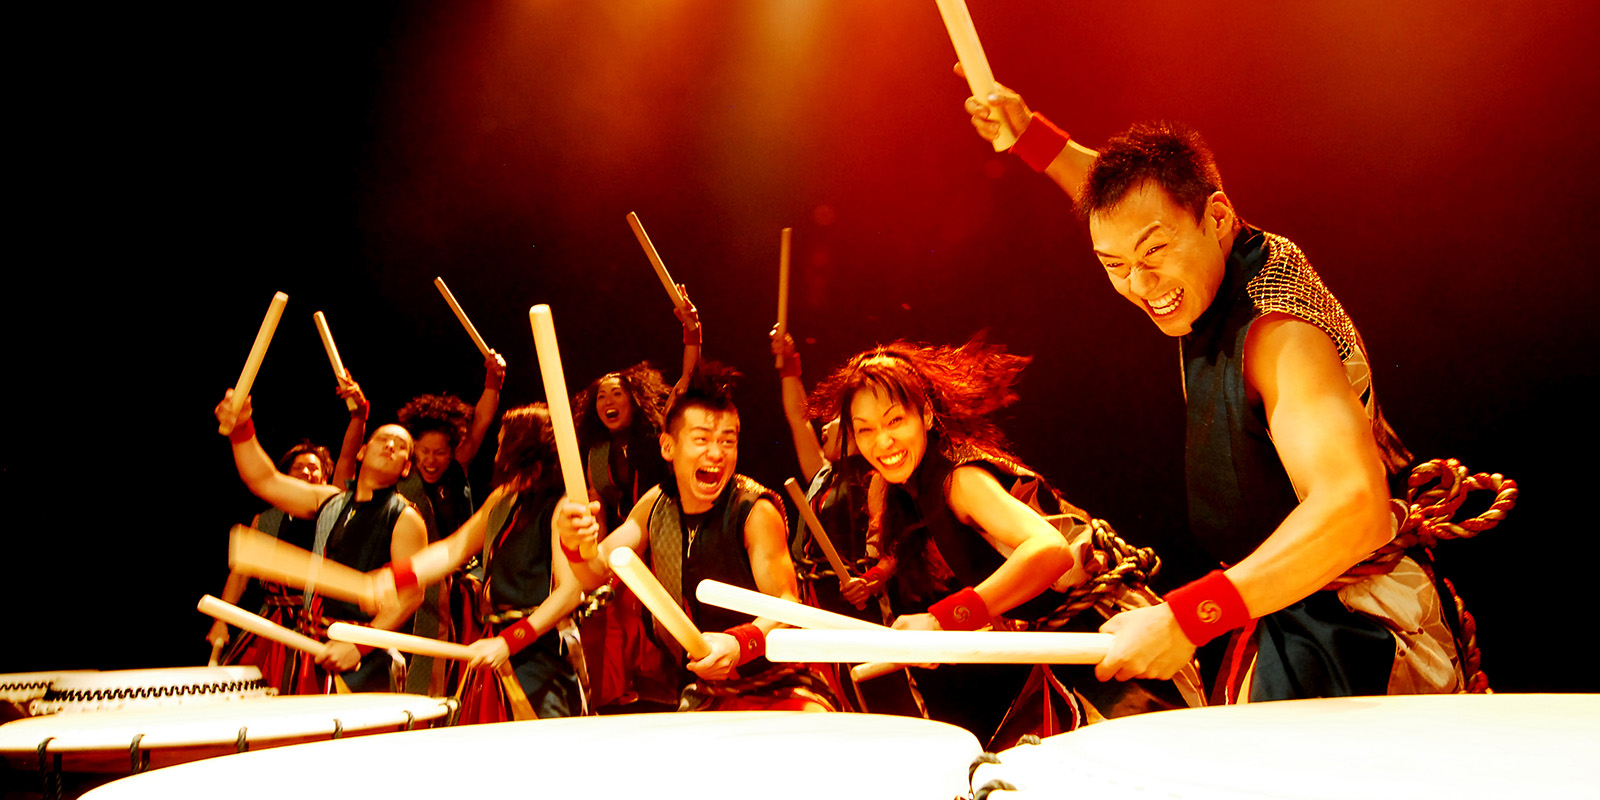 People in hold drumsticks and pound on large drums